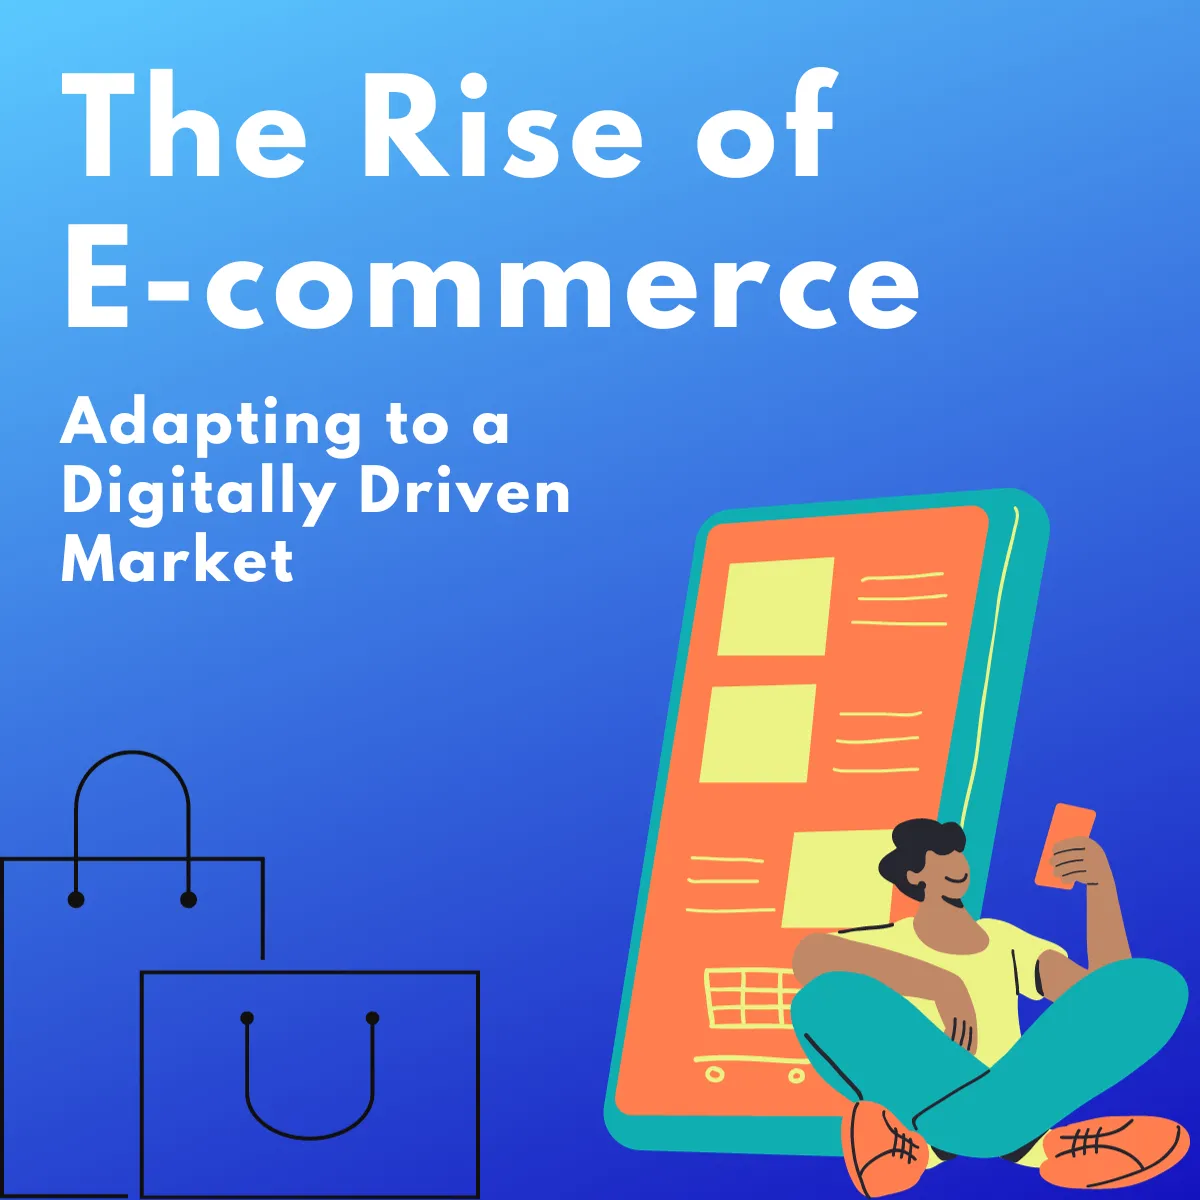 The Rise of E-commerce: Adapting to a Digitally Driven Market